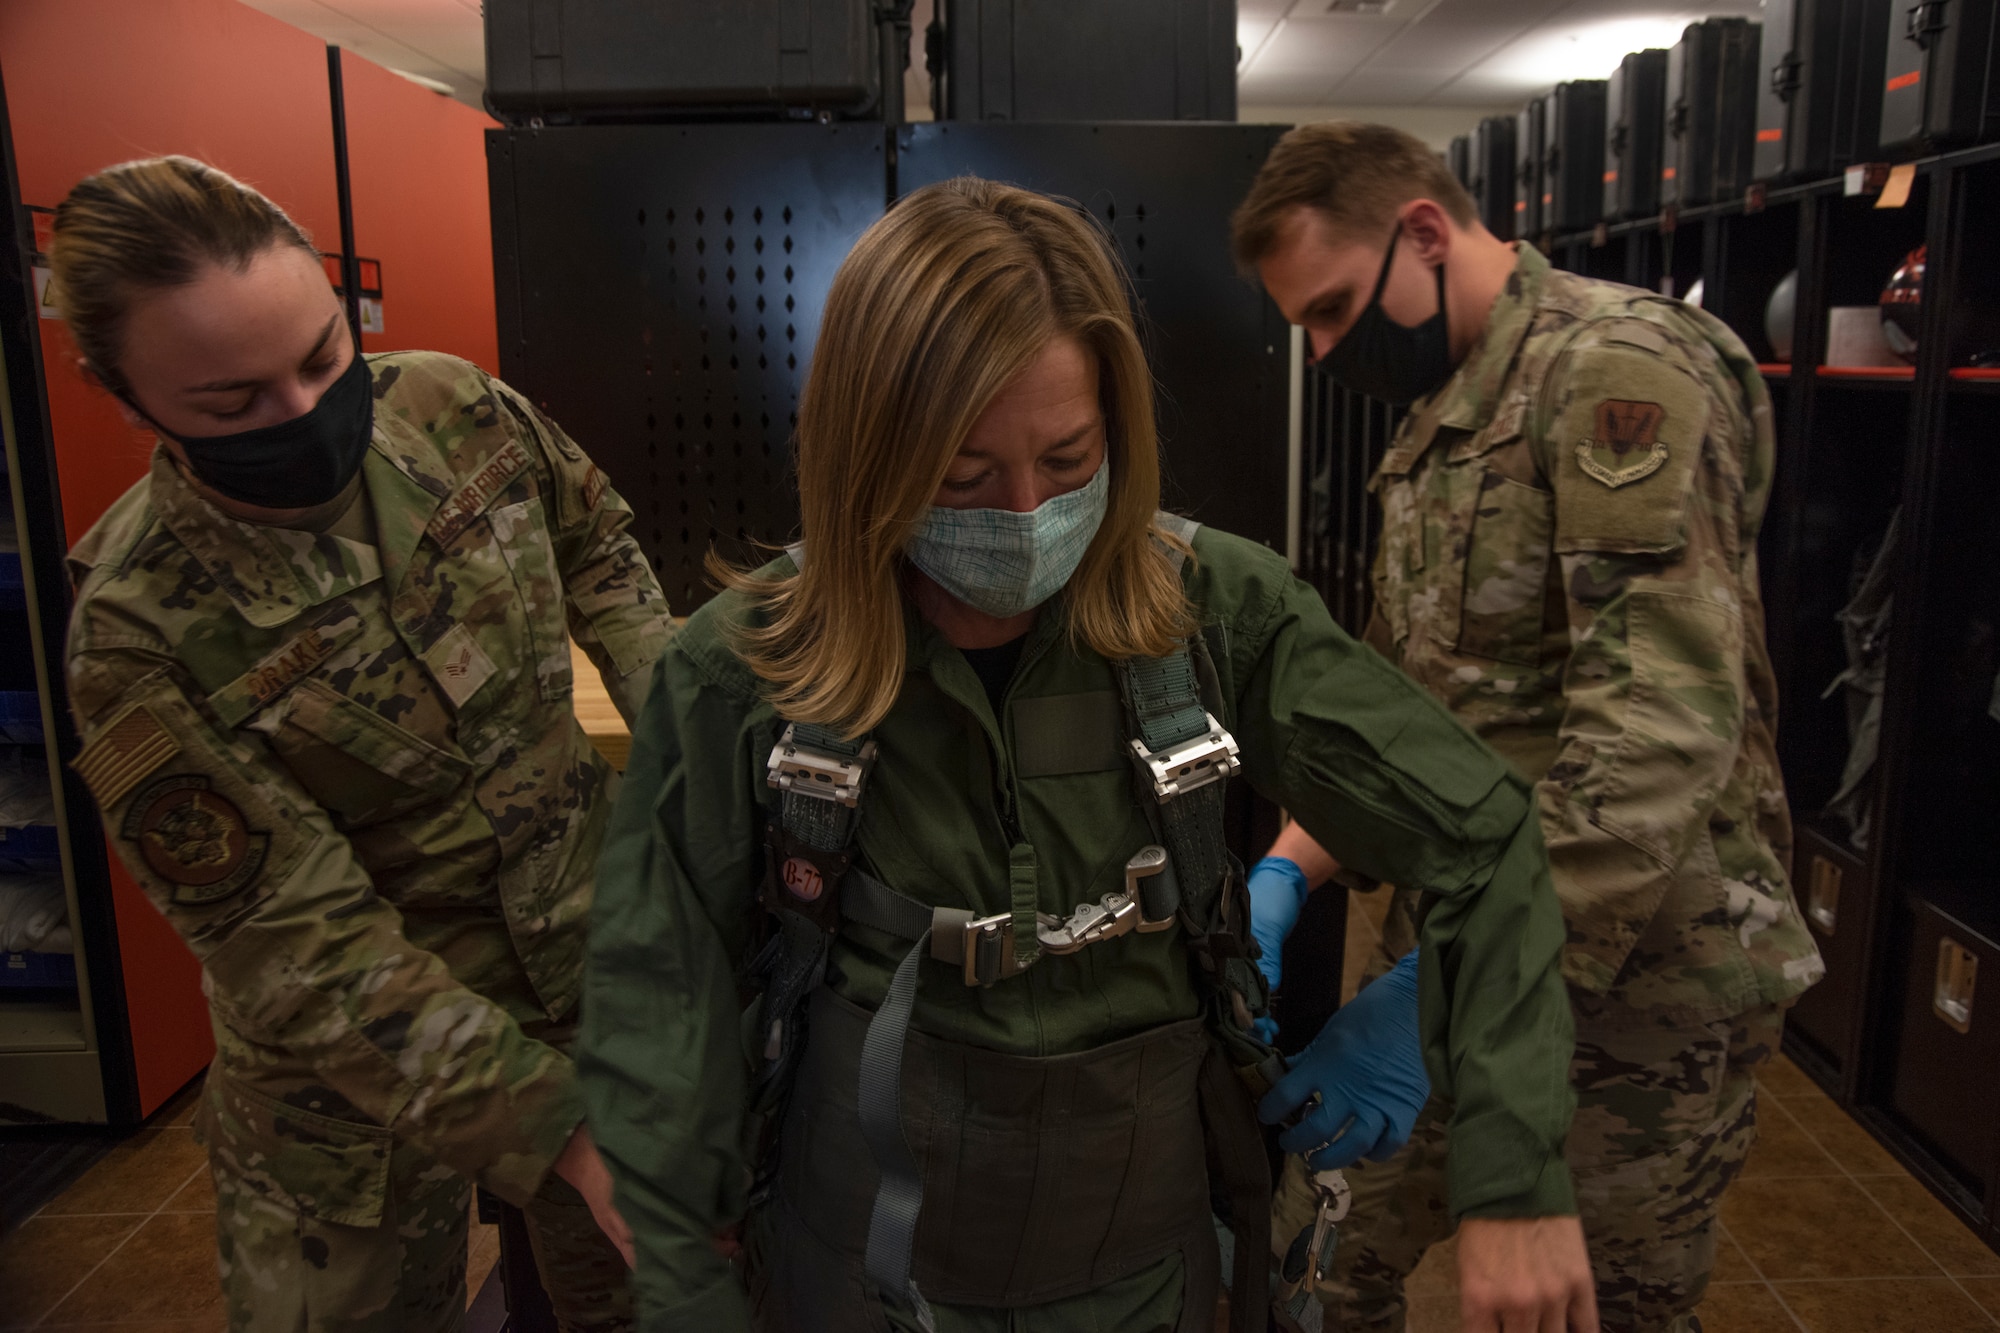 Two Airmen adjusts the waist measurement of the anti-gravity suit for the Boise Mayor.